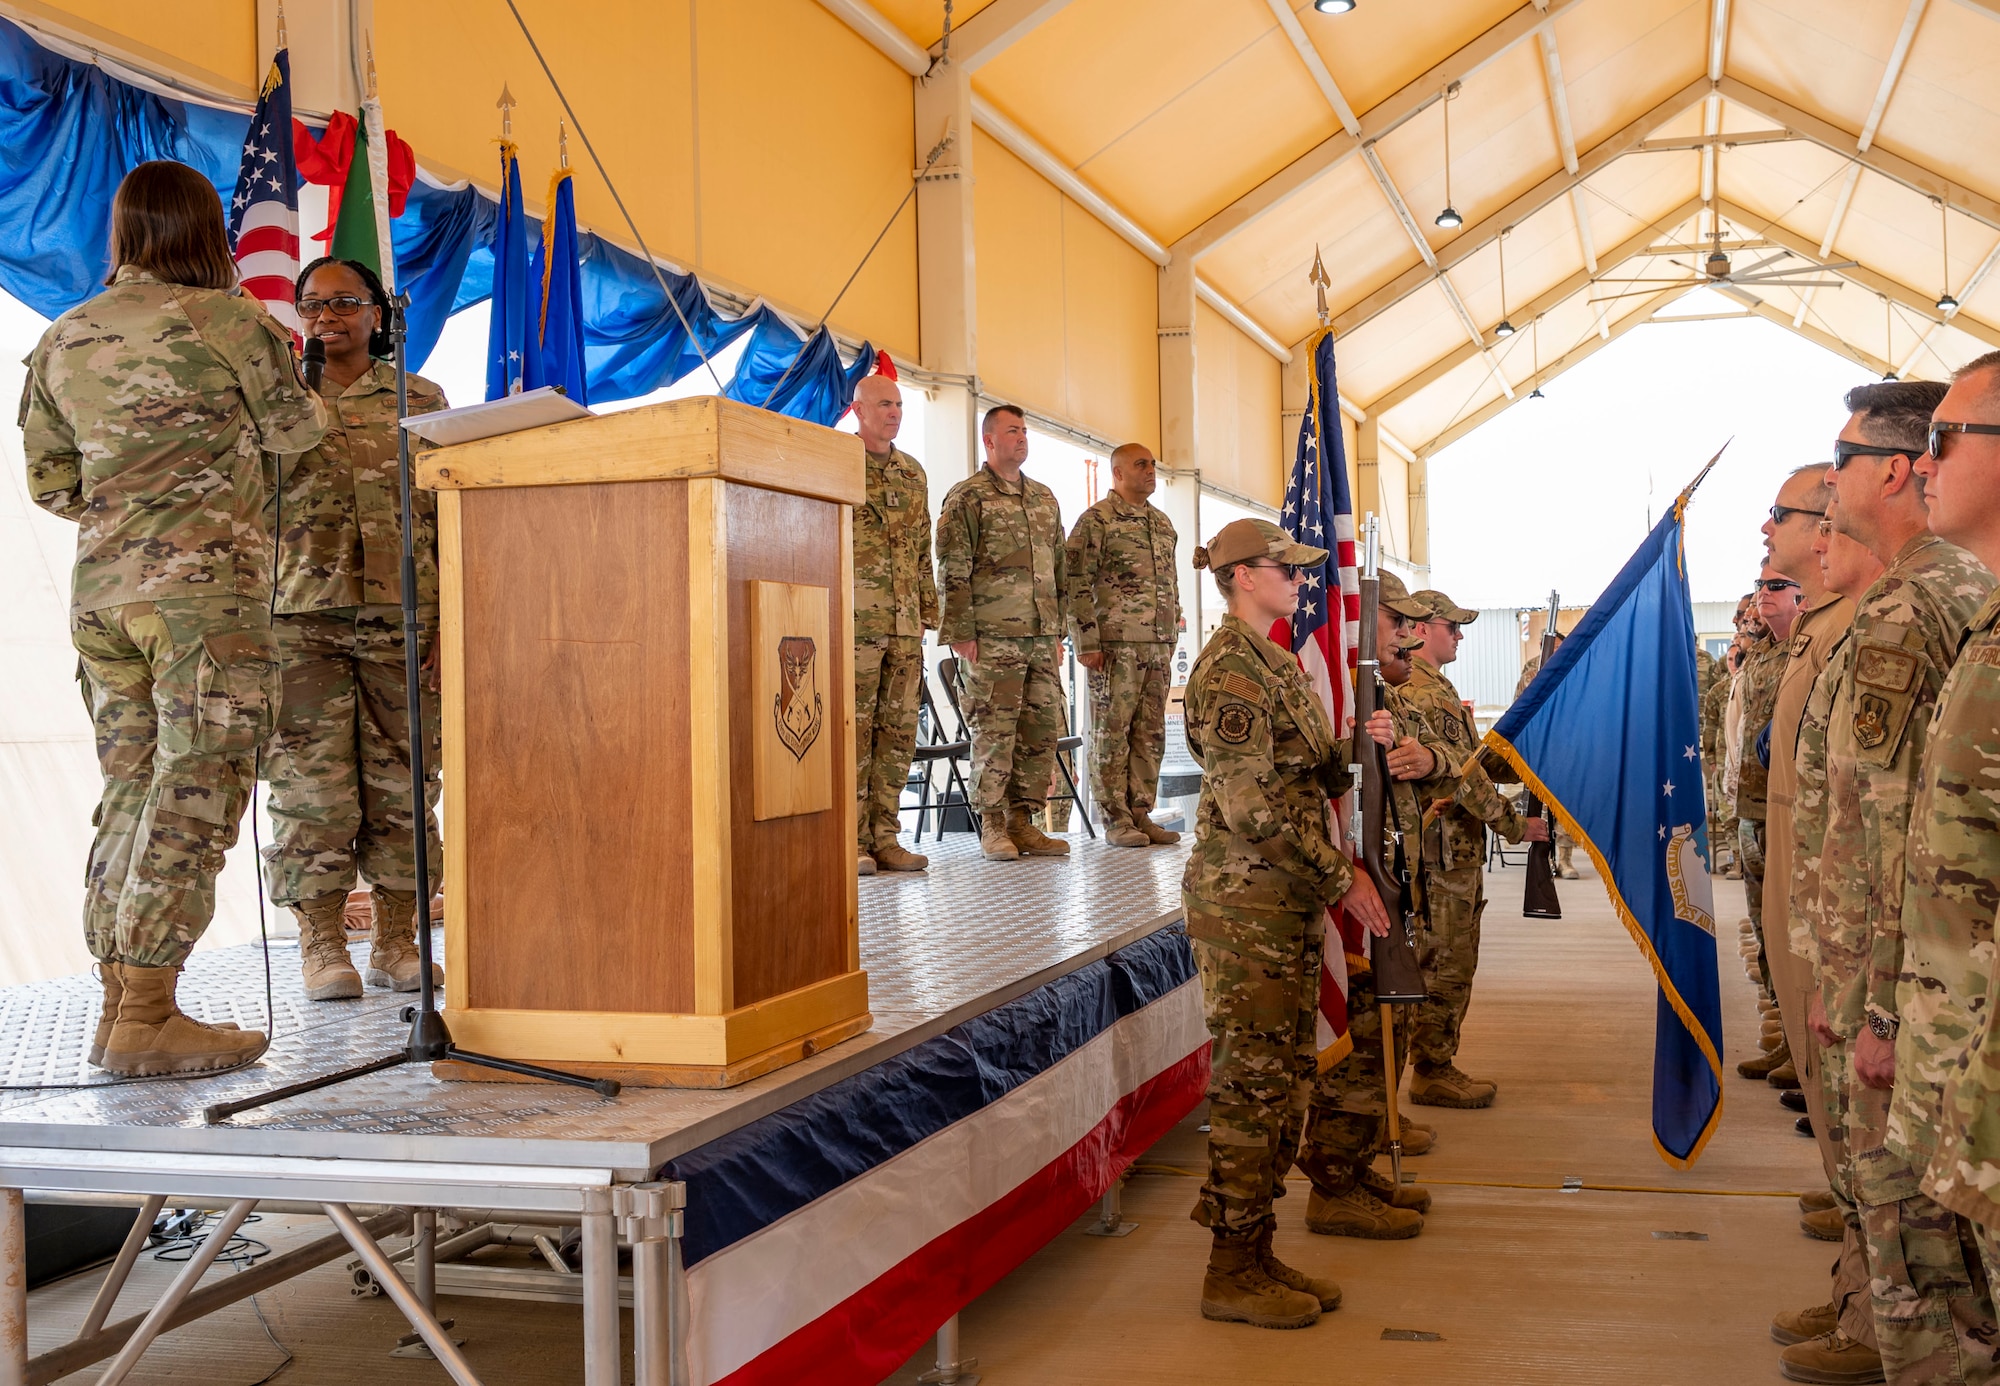 U.S. Airmen with the 378th Air Expeditionary Wing Honor Guard present colors while the national anthem is sung during a change of command ceremony at Prince Sultan Air Base, Kingdom of Saudi Arabia, May 18, 2023. During the ceremony, Brig. Gen. William Betts relinquished command of the 378th AEW to Brig. Gen. Akshai Gandhi. The tradition of change of command ceremonies are to allow service members to witness their new leader assume the responsibility and trust associated with the position of commander. (U.S. Air Force photo by Senior Airman Stephani Barge)